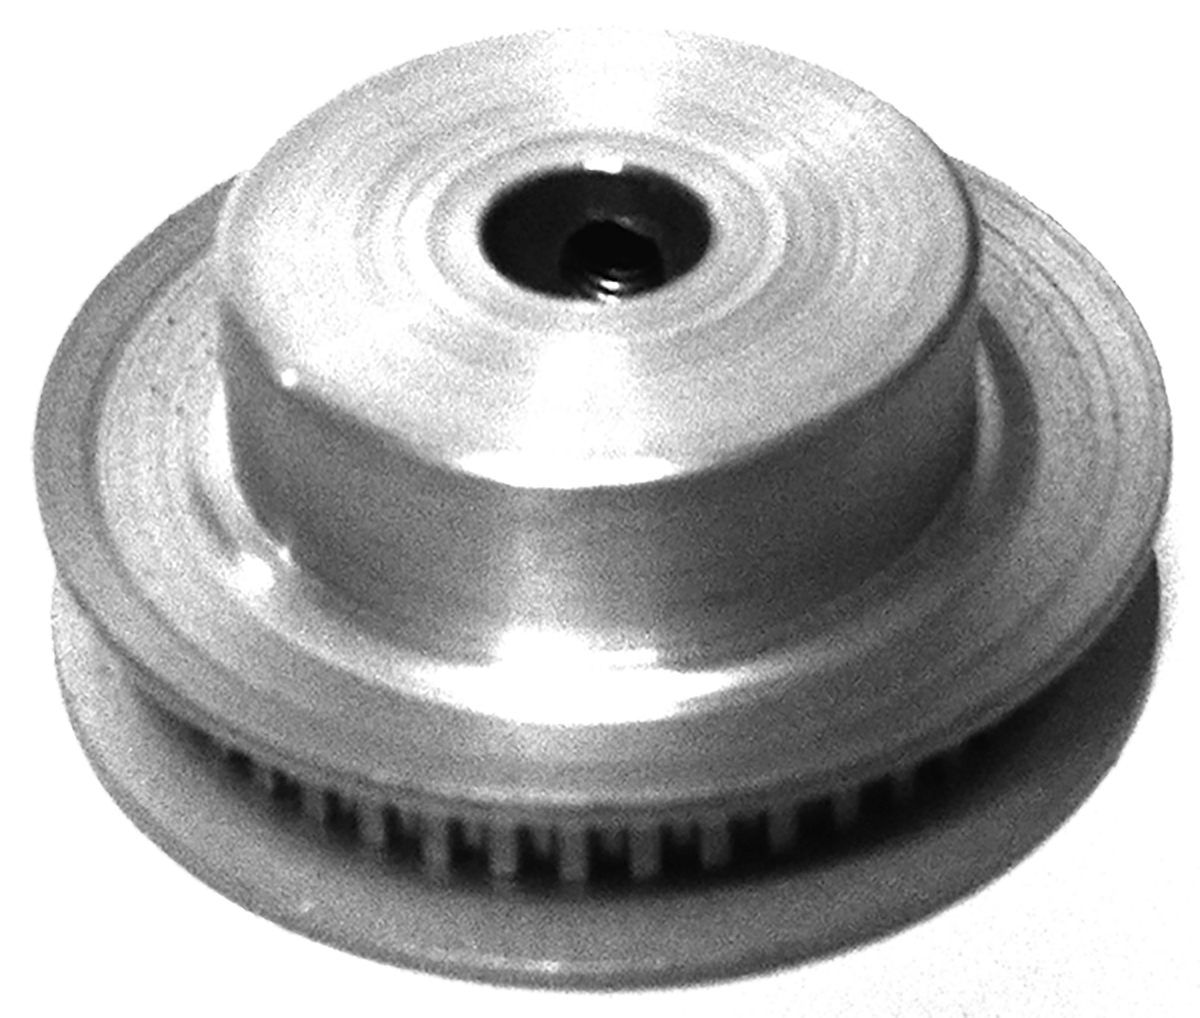 44MP012-6FA3 - Aluminum Imperial Pitch Pulleys